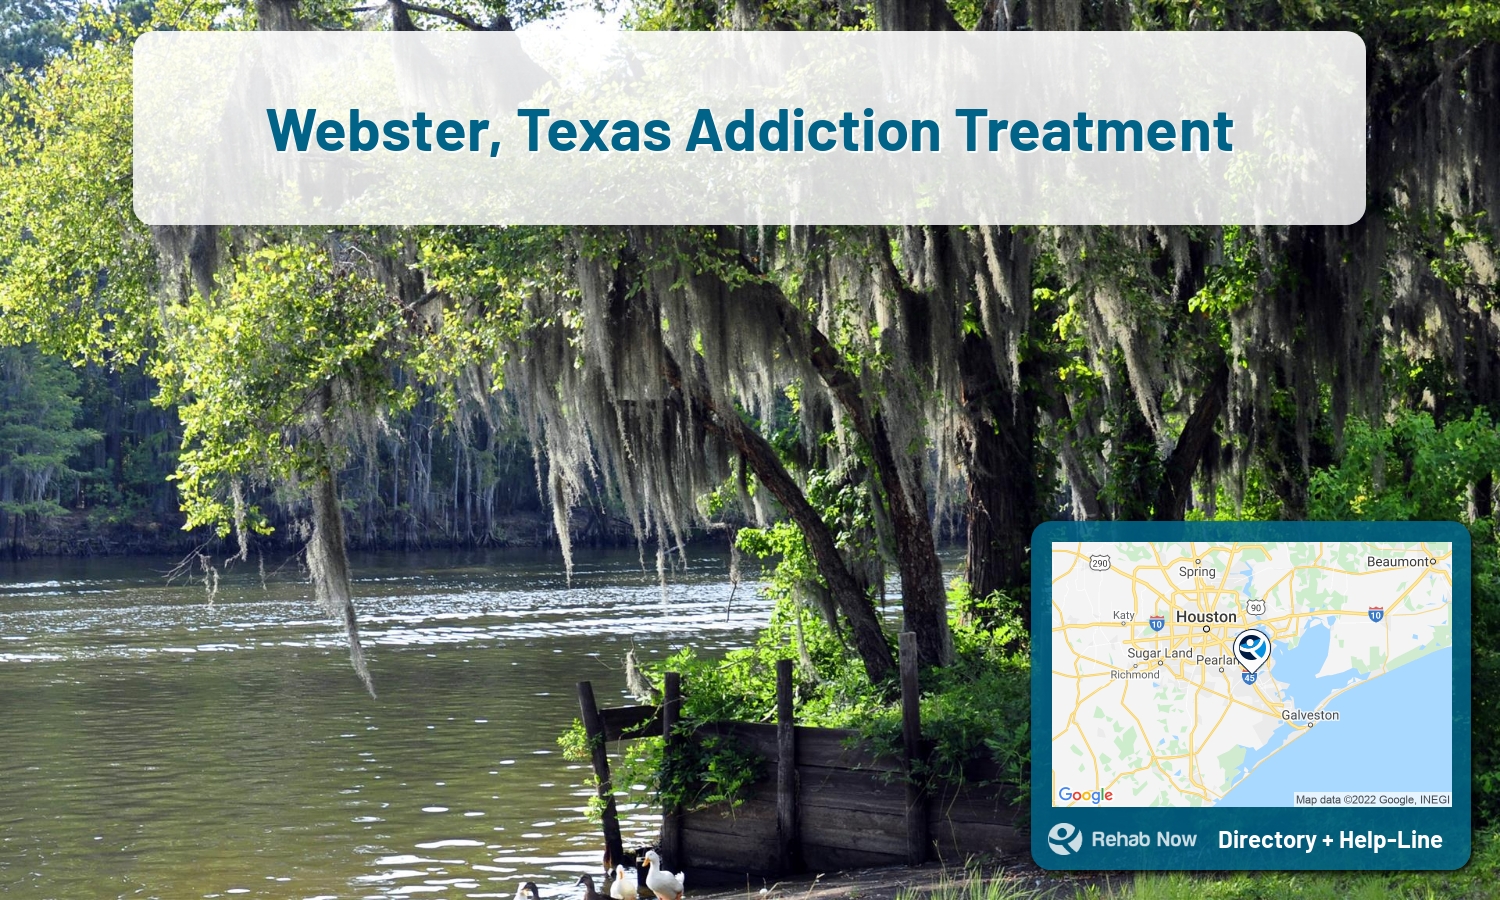 Drug rehab and alcohol treatment services near you in Webster, Texas. Need help choosing a center? Call us, free.